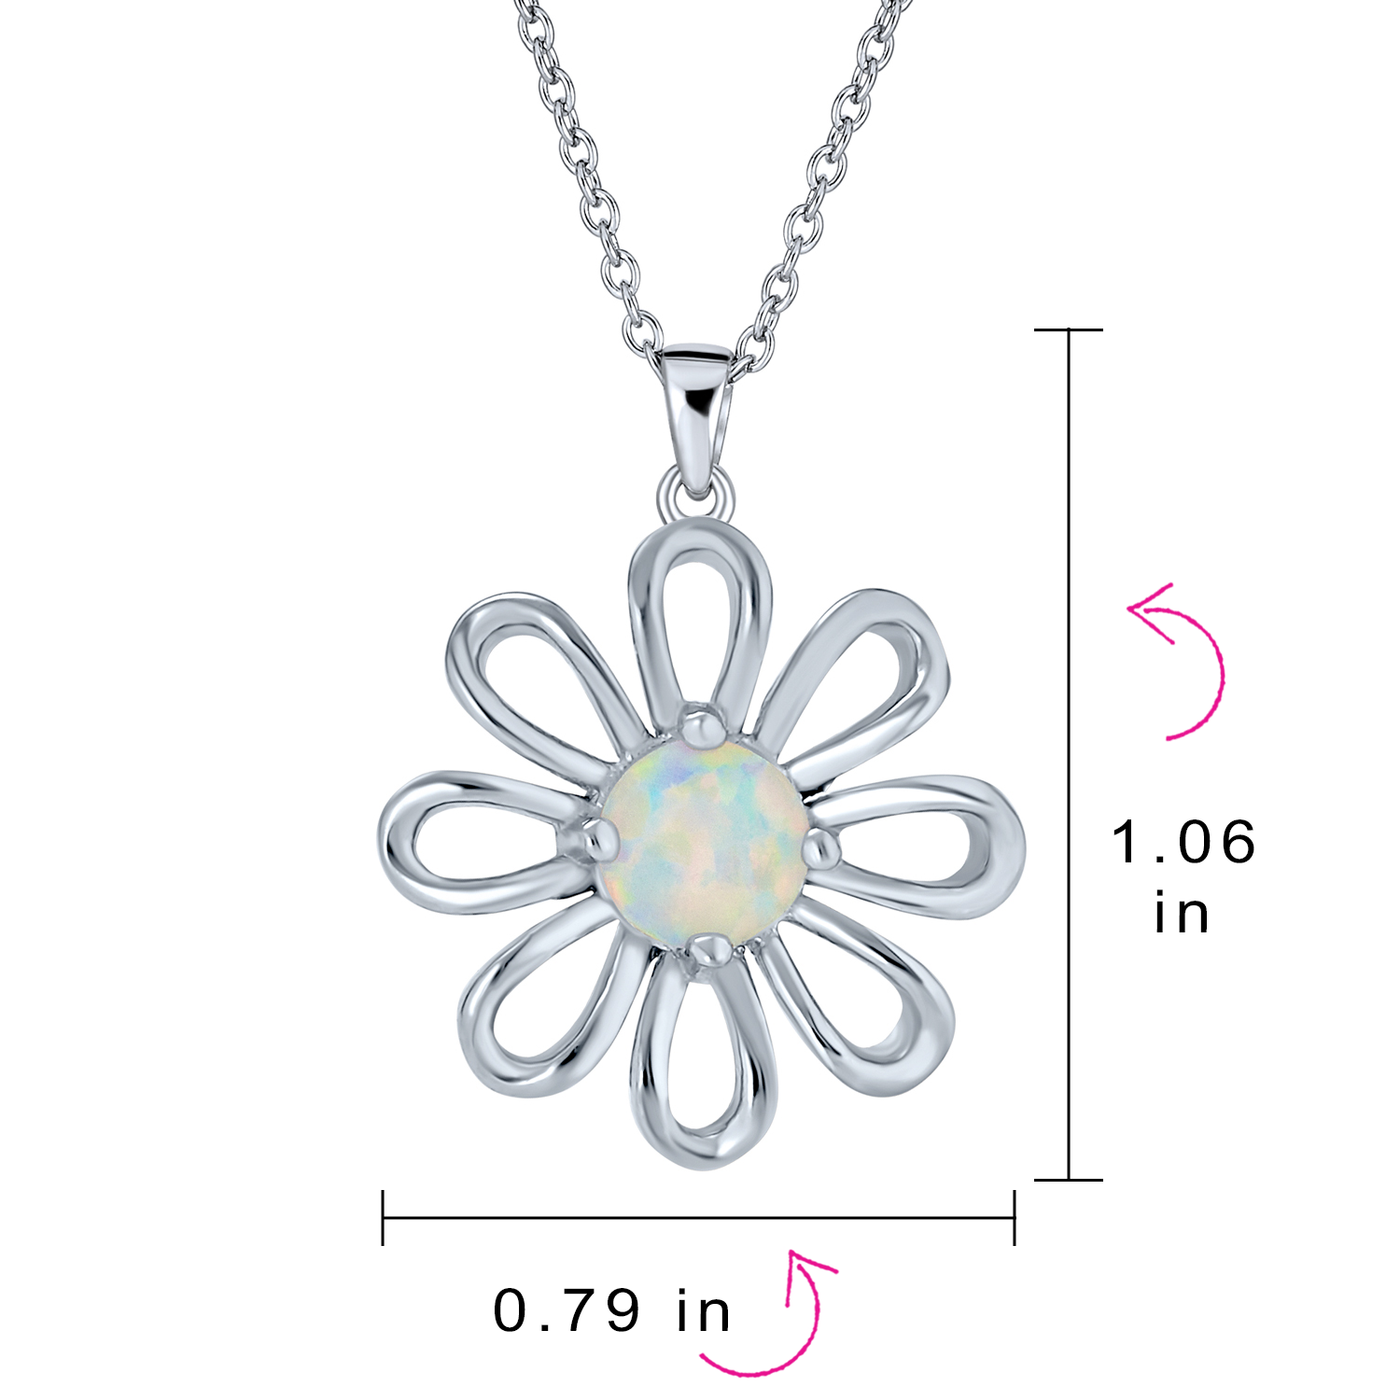 Daisy Flower White Created Opal Pendant Sterling Silver Necklace